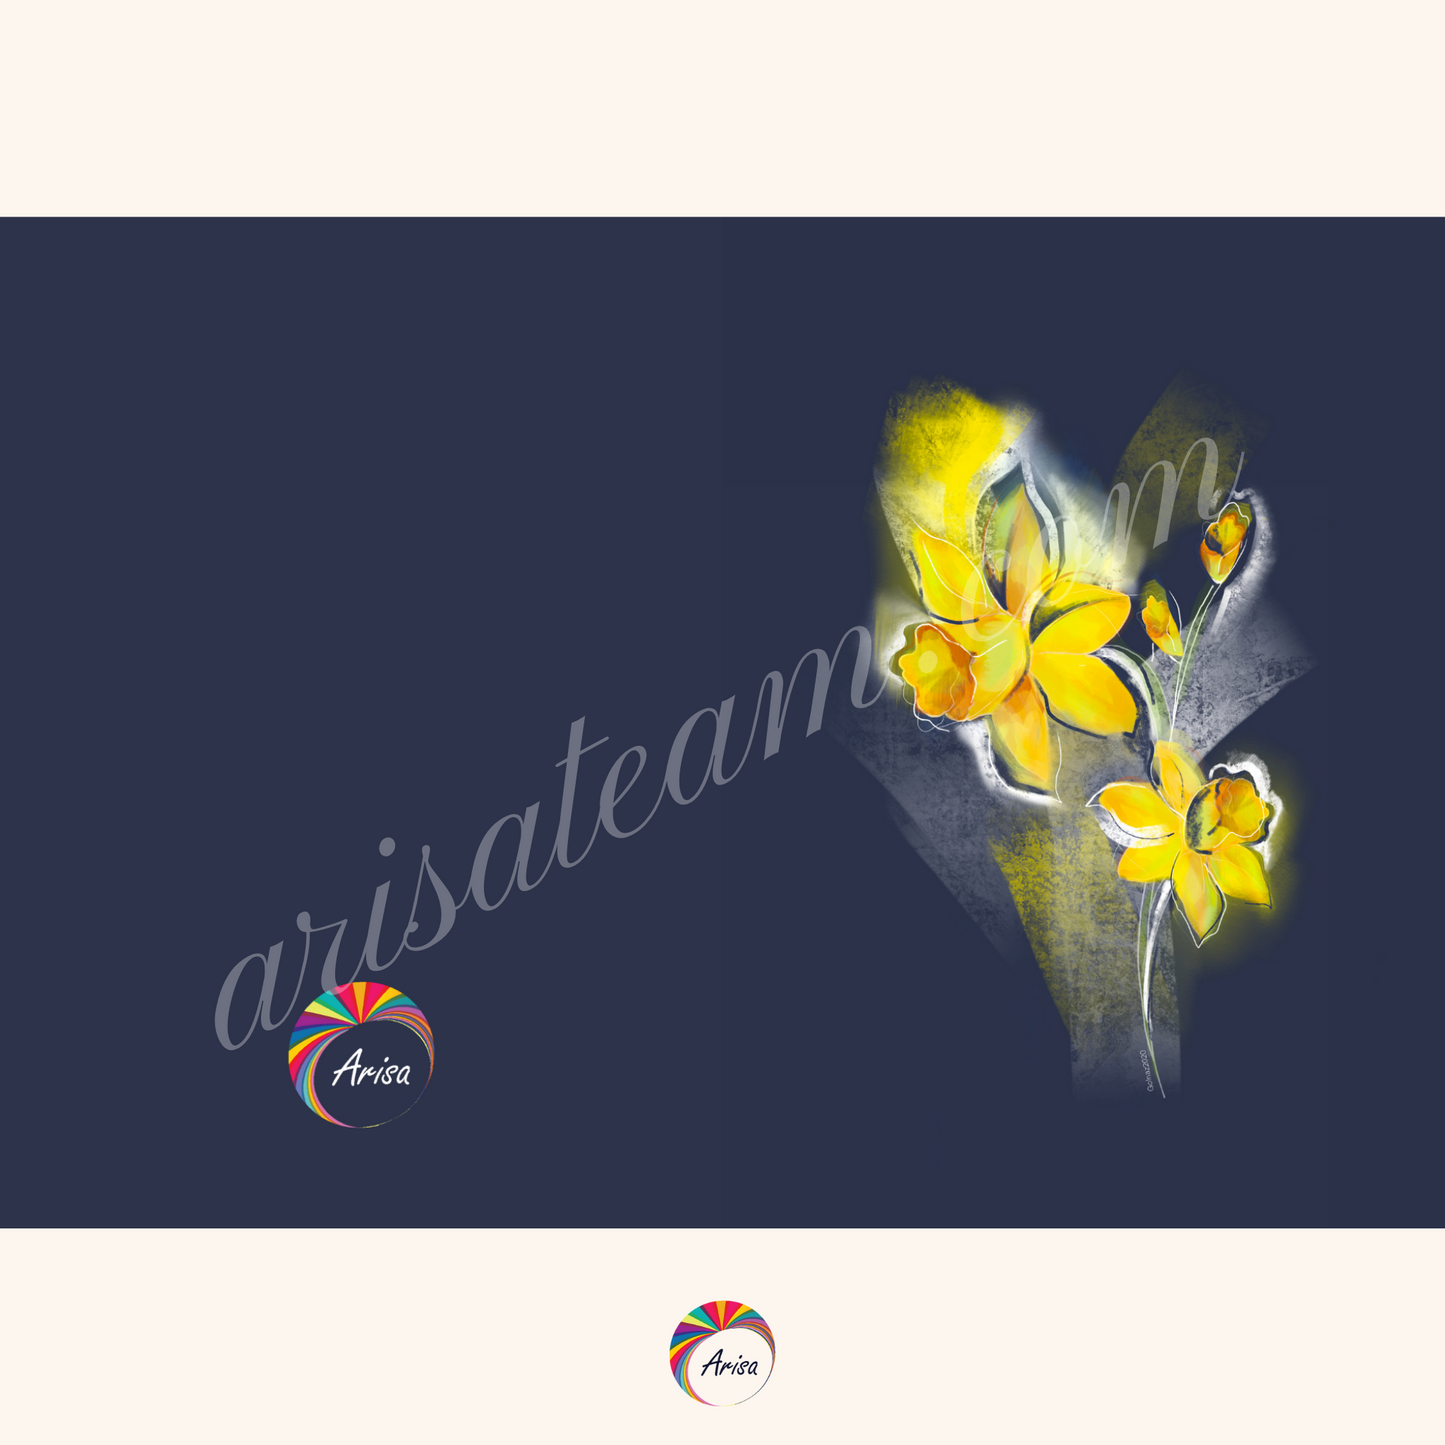 "DAFFODIL" Greeting Card by ArisaTeam in complete form before folding.